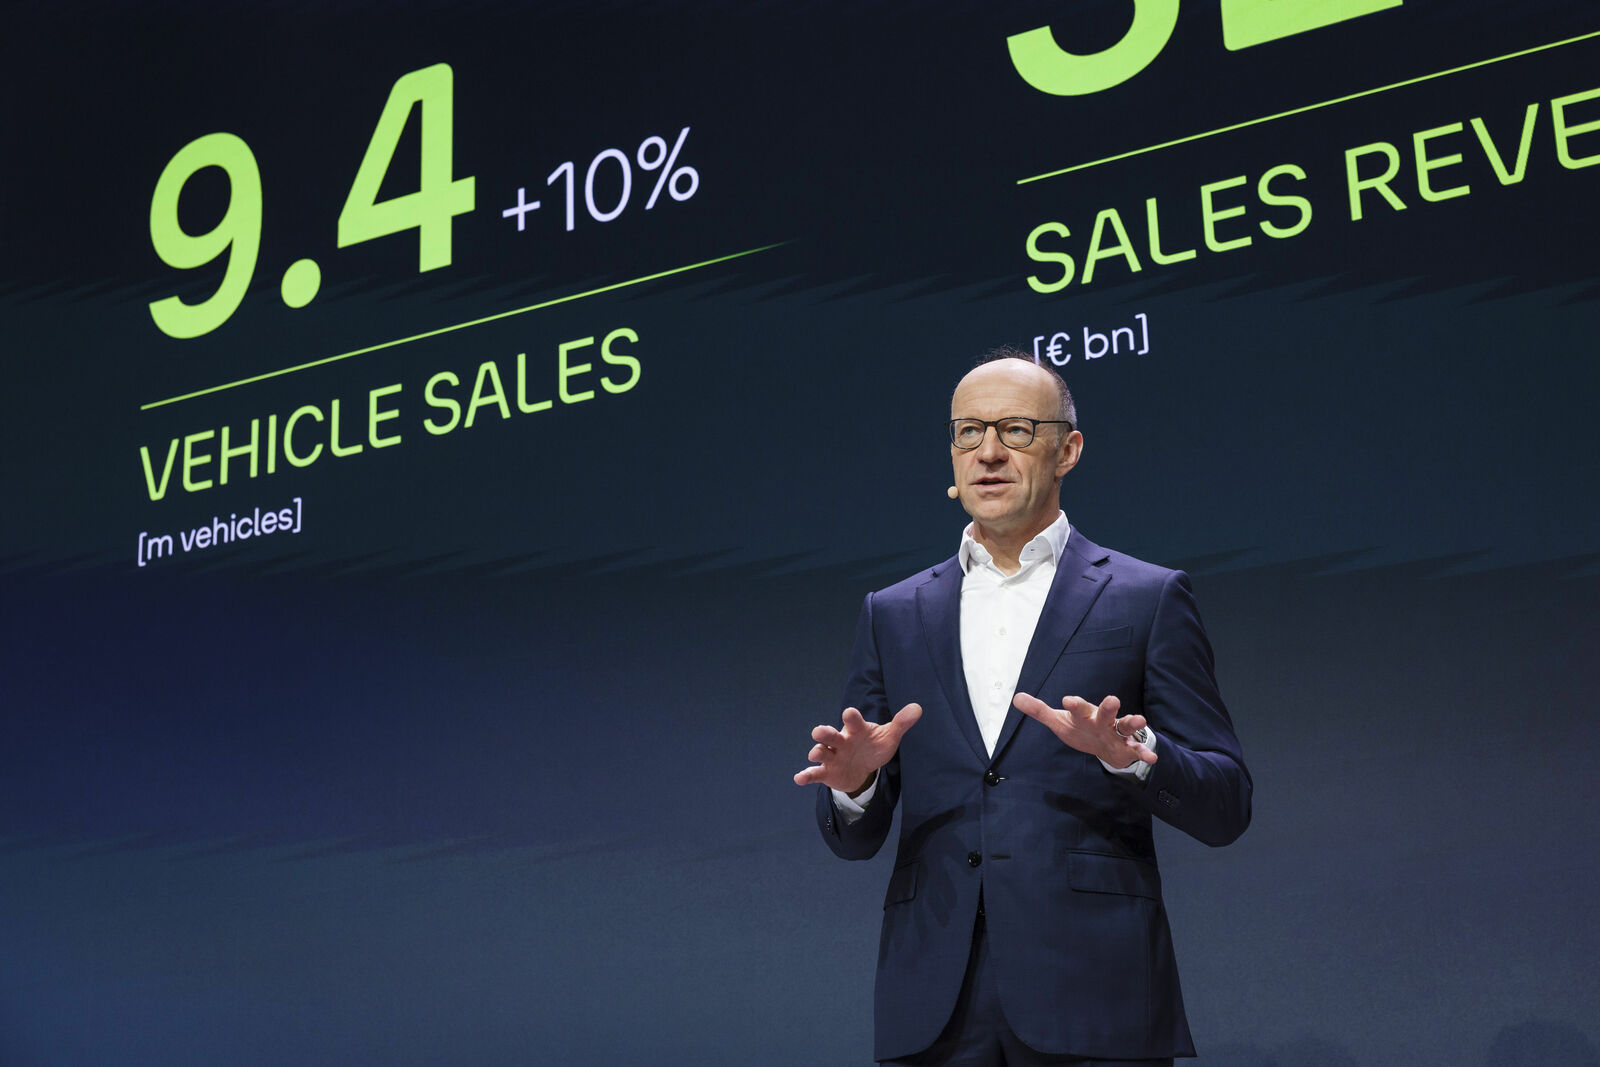 A man on stage presenting vehicle sales and sales revenue figures in front of a large display board.